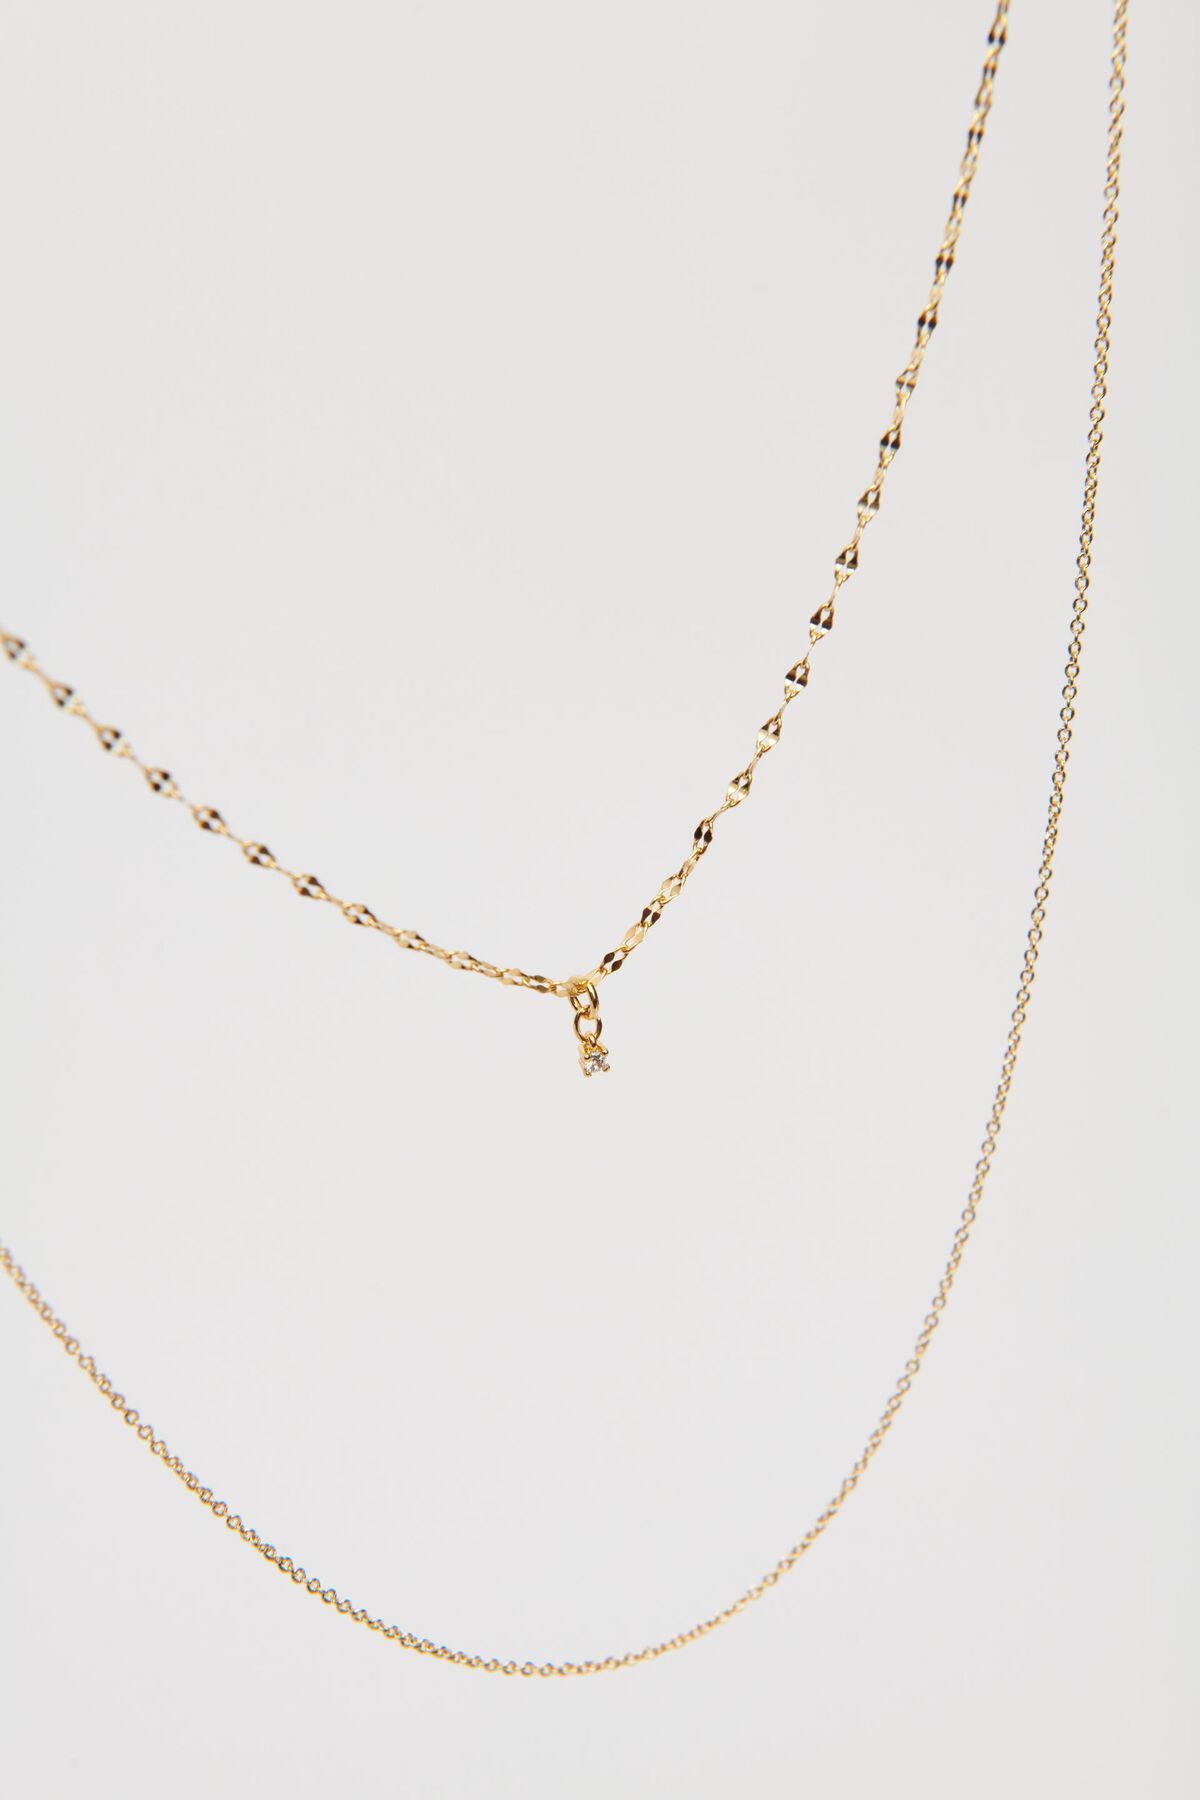 Dynamite 14K Gold Plated Layered Gem Necklace. 4